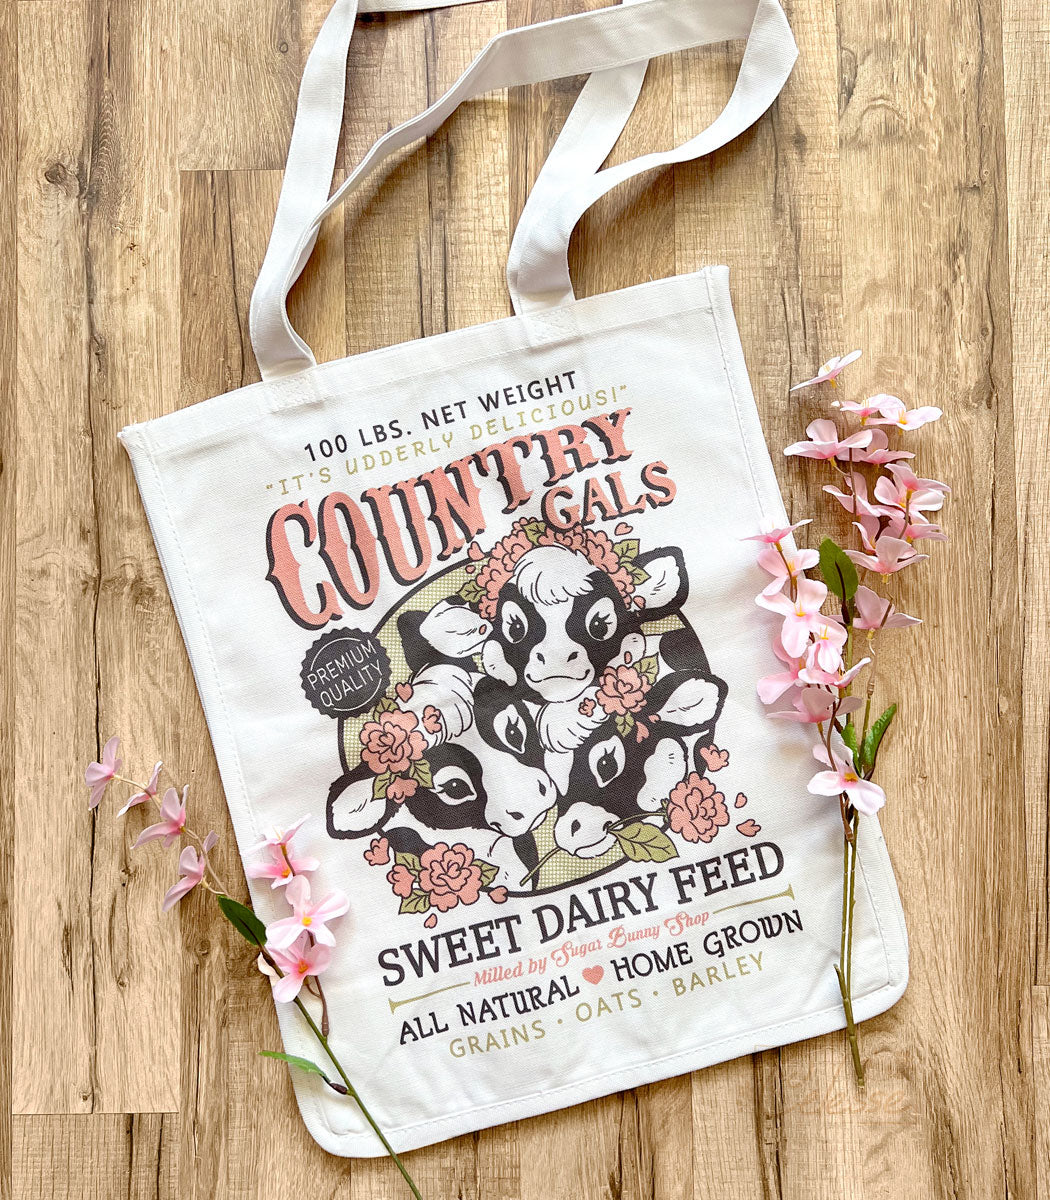 Country Gals Dairy Feed Cows Canvas Tote Bag